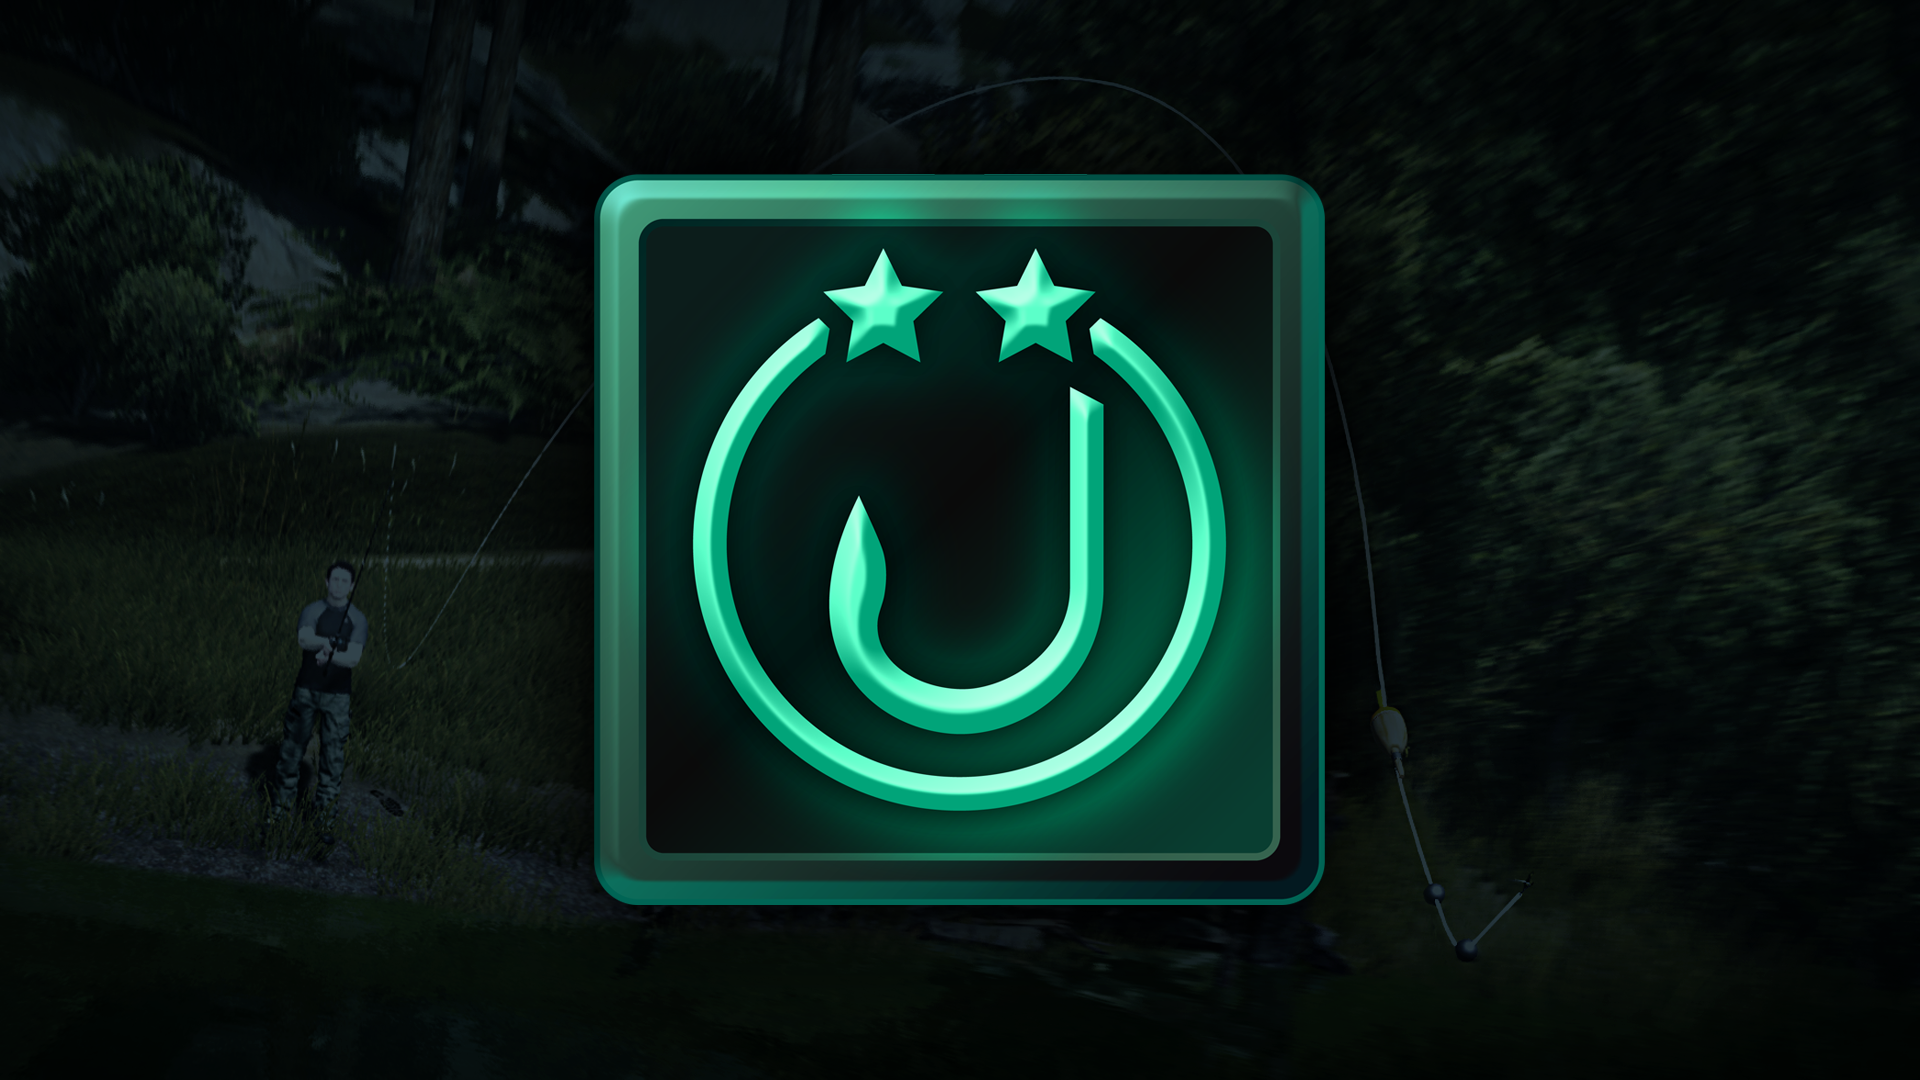 Icon for Bronze hook